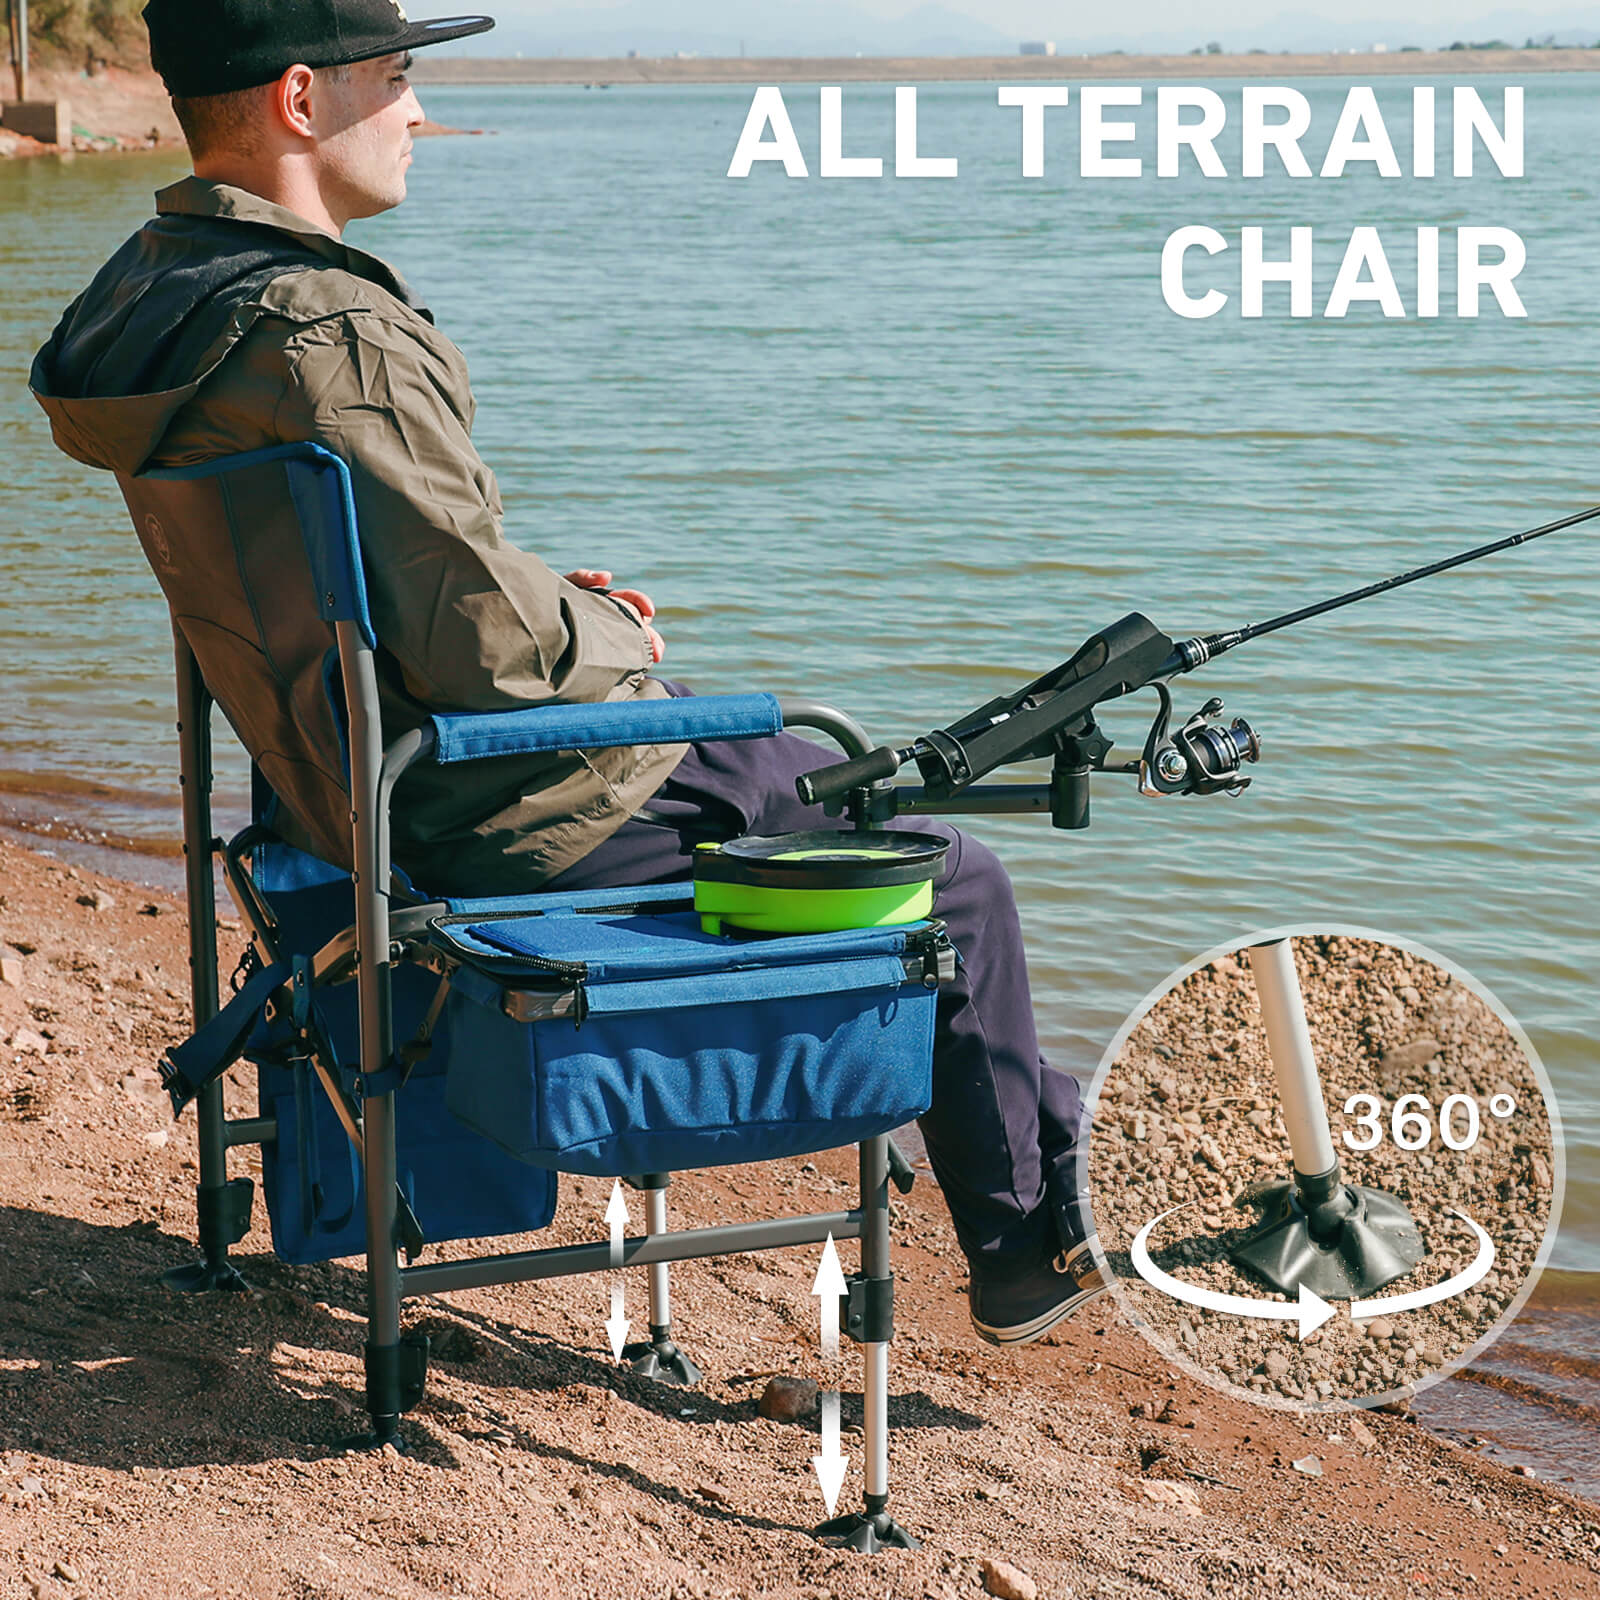 IMPRINTED Backpack Fishing Chair with Cup and Rod Holder - Custom Chair  Designer